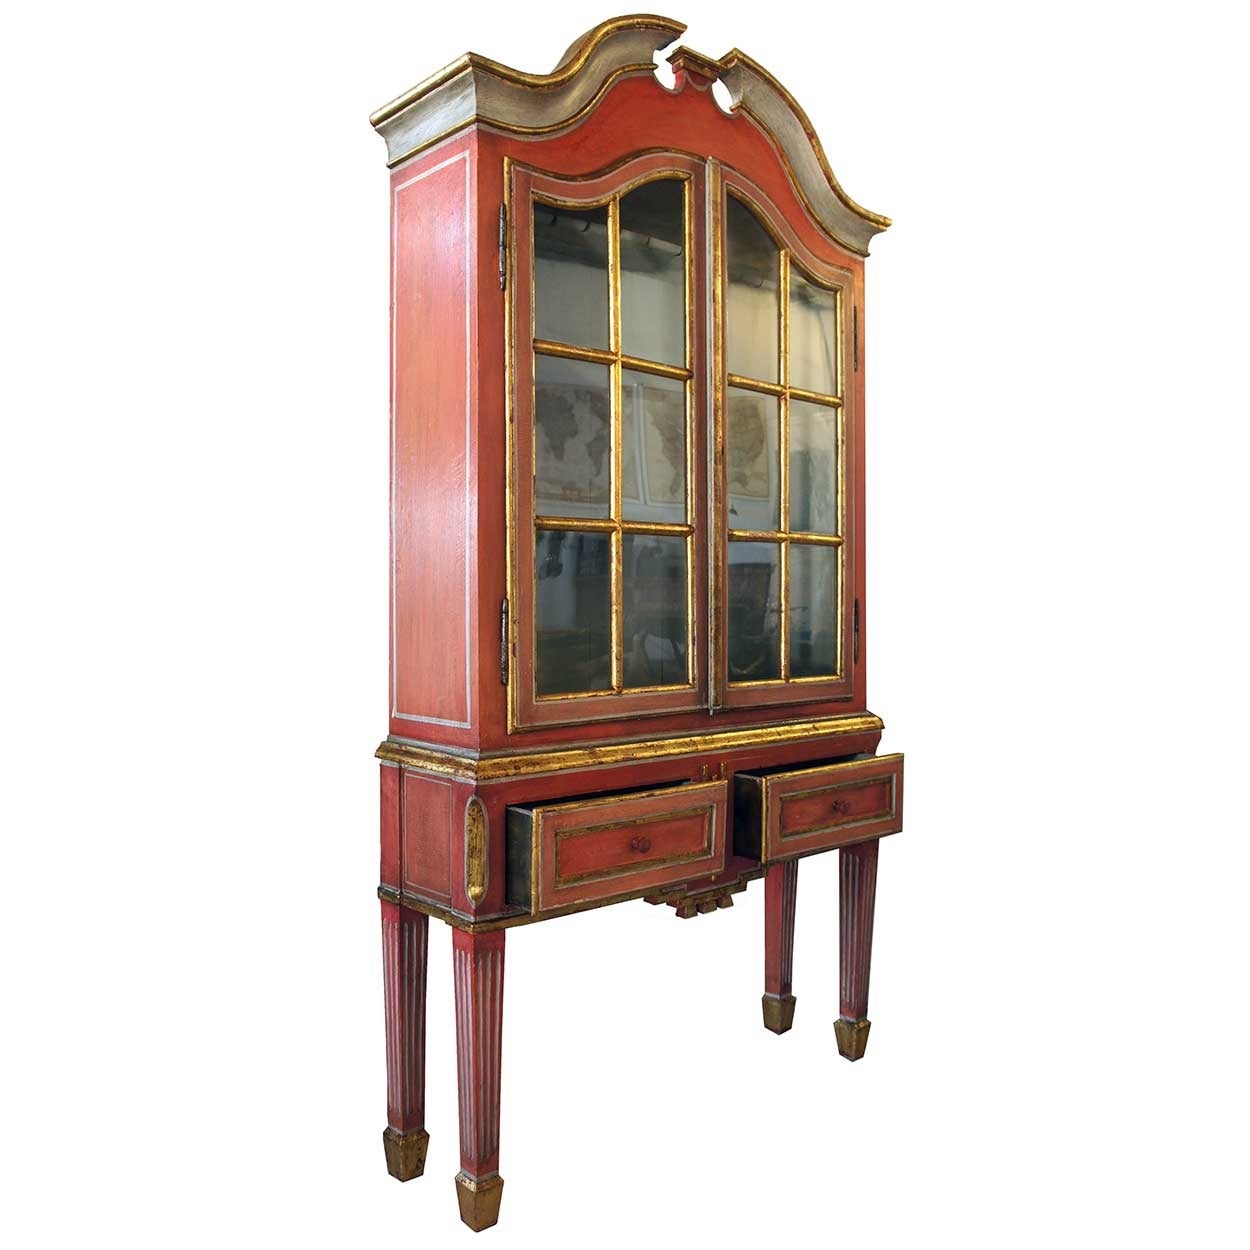 This small and elegant piece was fashioned with a broken pediment top over double, glazed doors that reveal the treasures inside. It sits atop a stand that has two drawers and terminates on tapered, fluted legs. It retains most of the original gilt